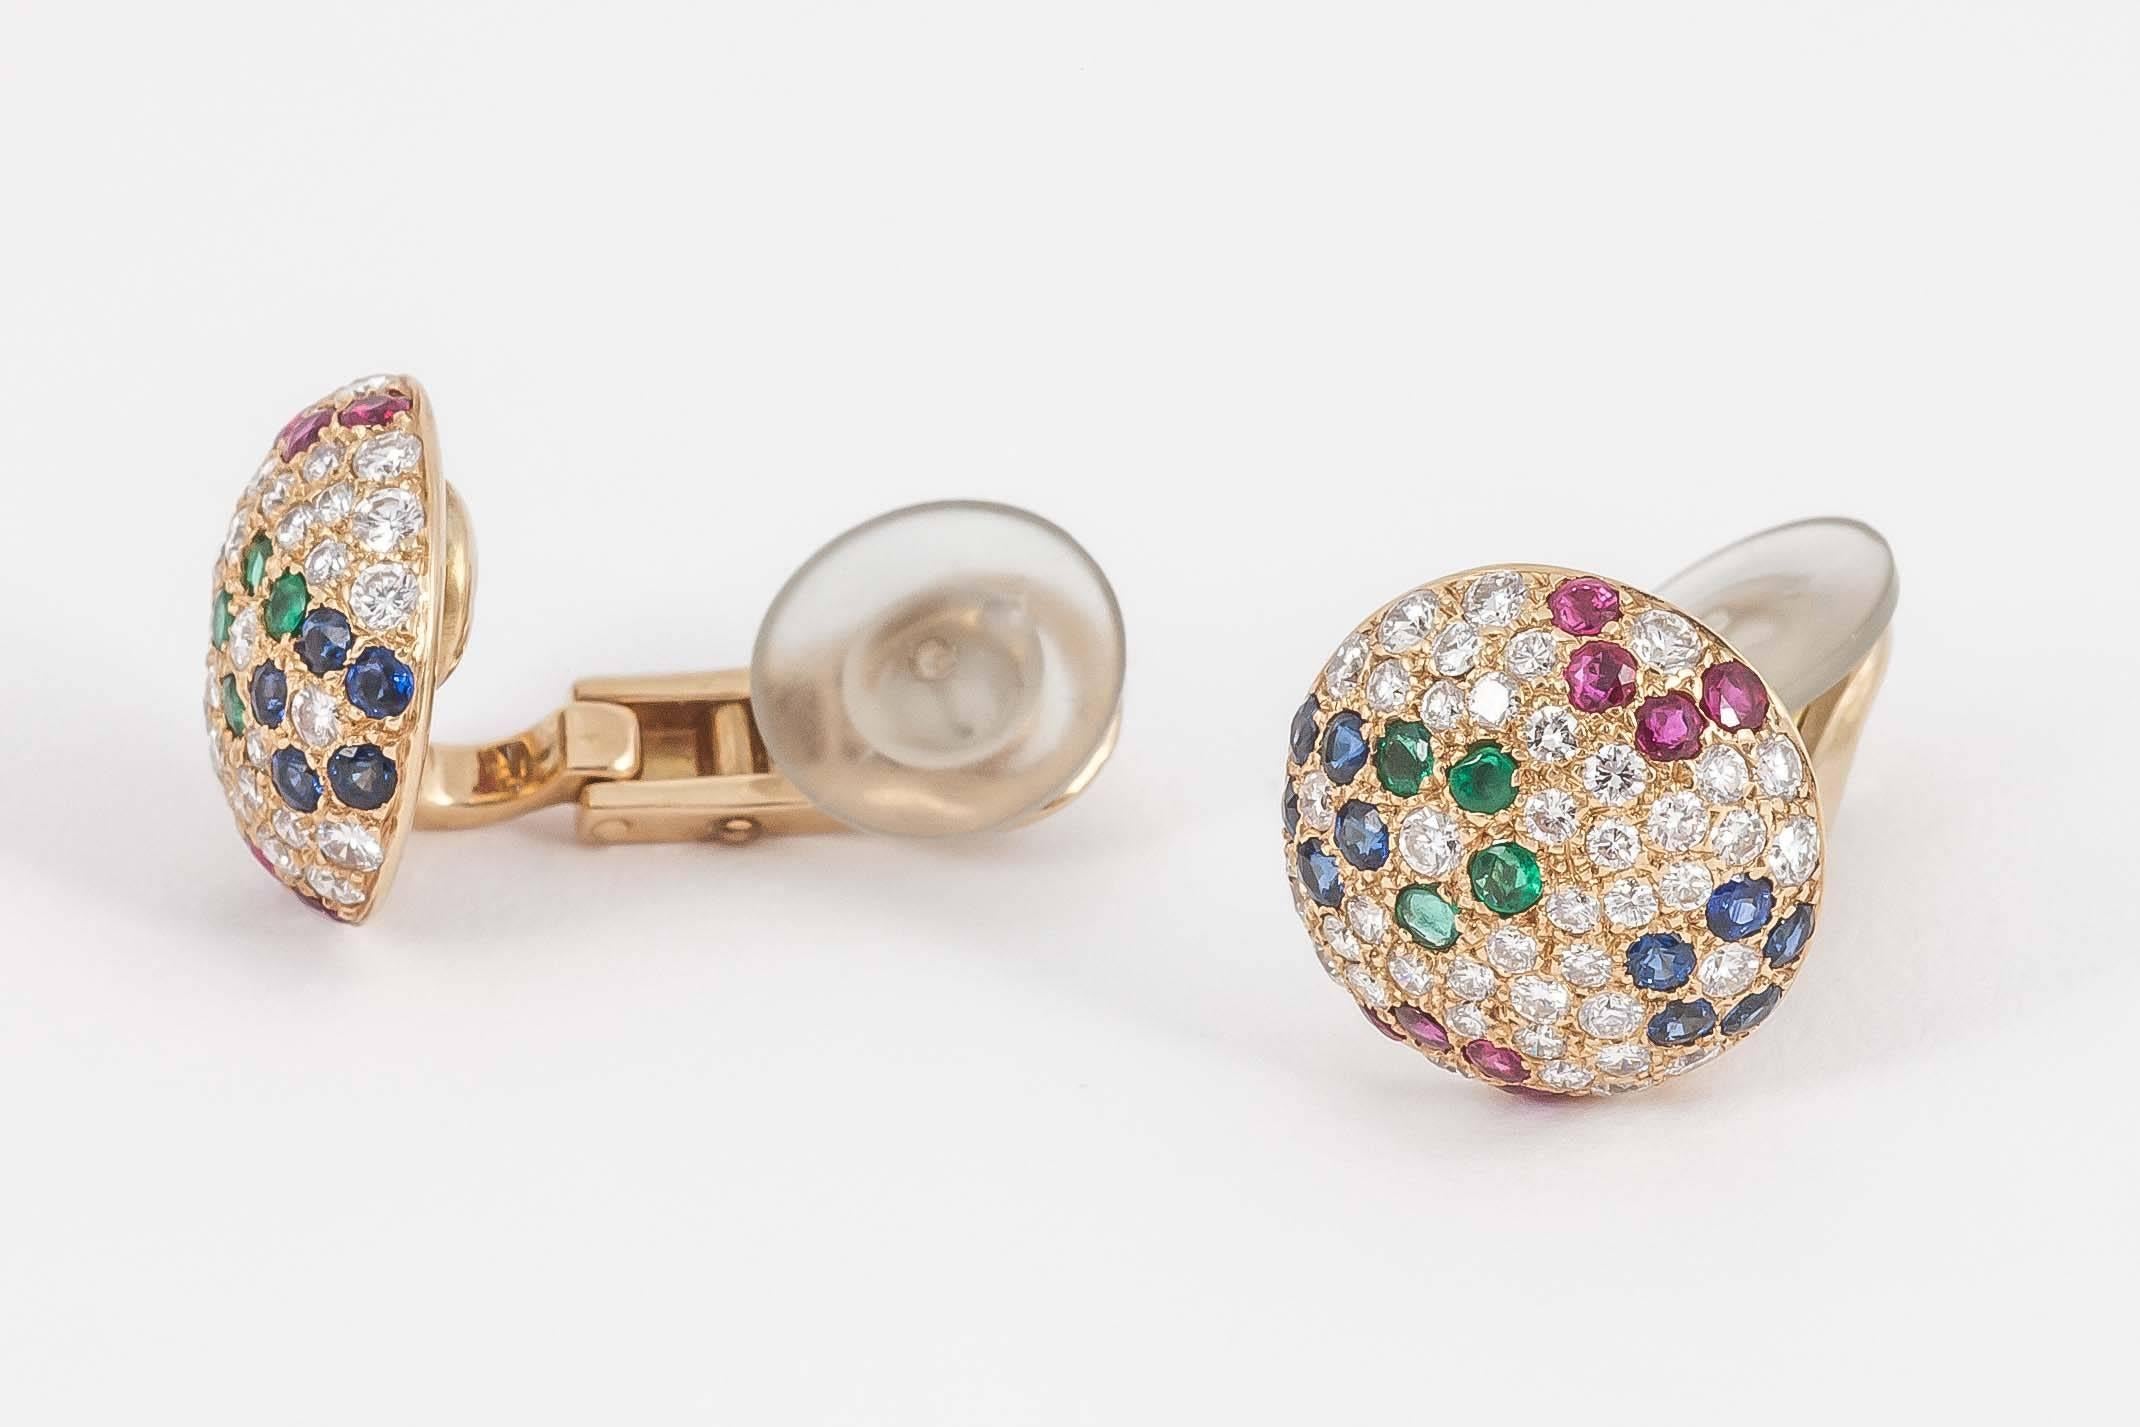 Women's Earrings in 18 Karat Gold Pave Set Diamonds & Coloured Stones, French circa 1980 For Sale